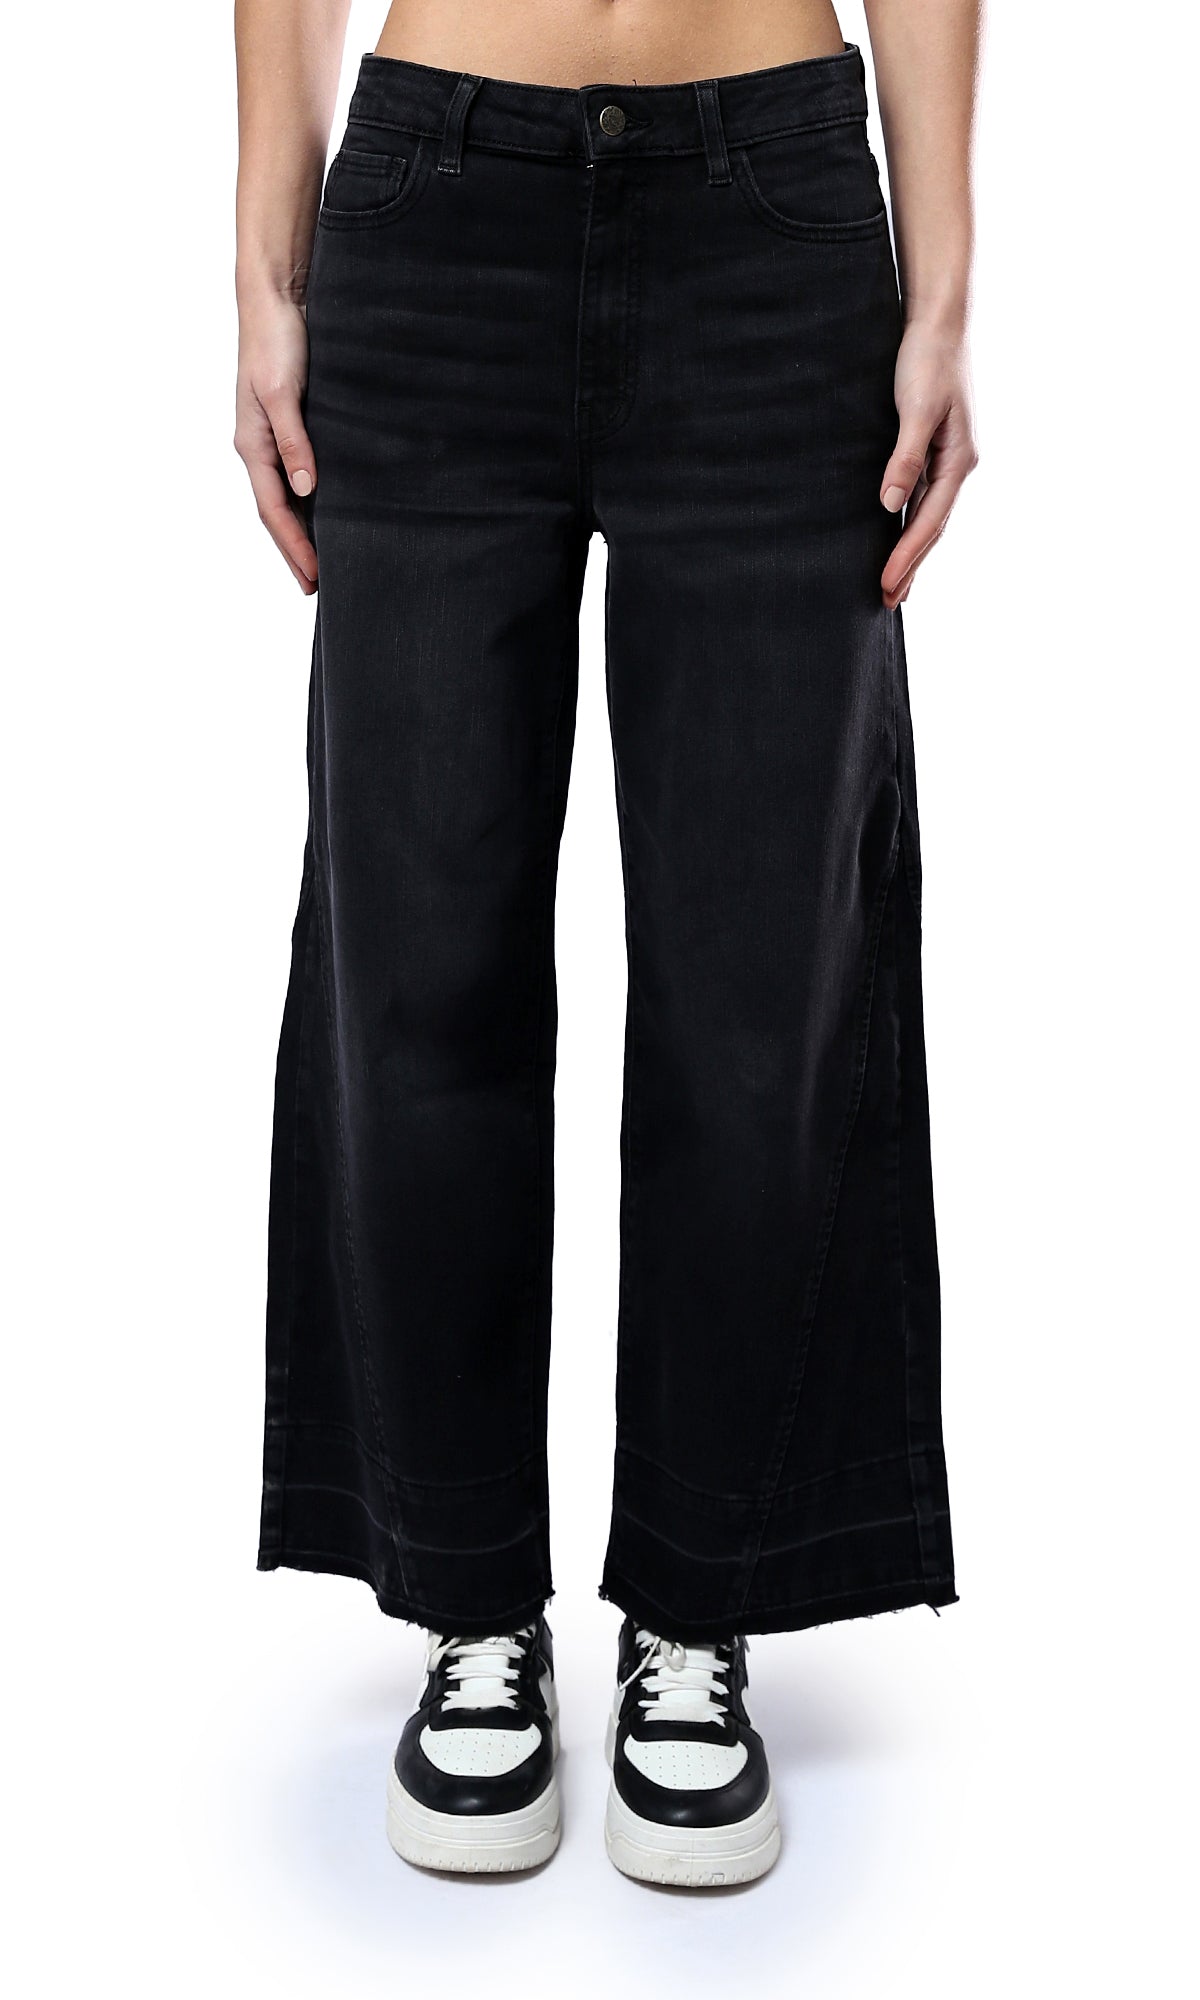 O182220 Solid Black Wide-Leg Jeans With Front Wash